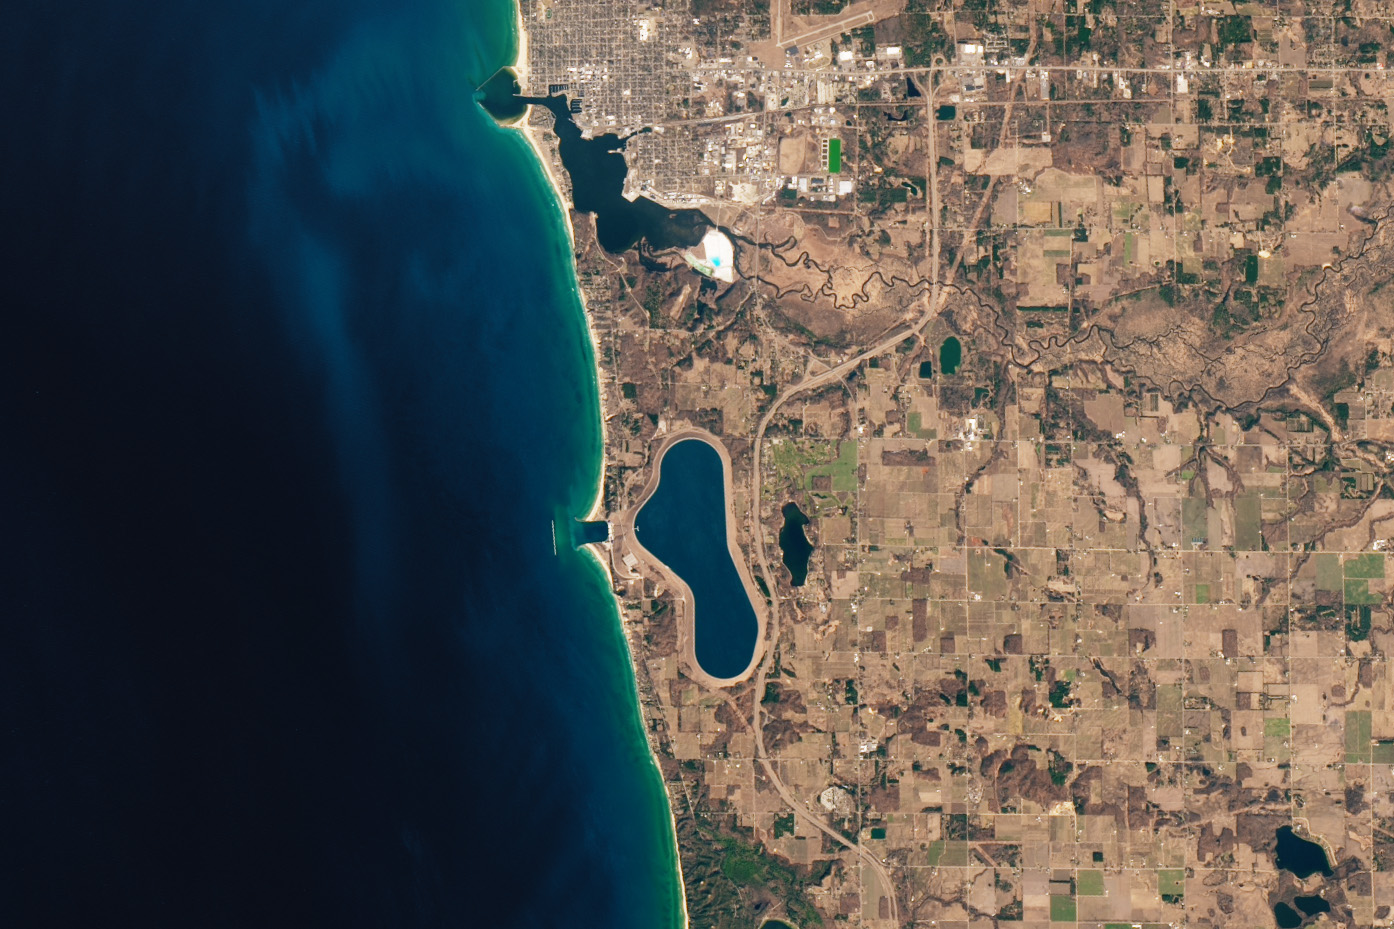 Lake Michigan is shown left in a rich blue and the state of Michigan is shown left. The land appears to largely be farmland in gridded fields, but most notably just barely inland from the coasts is an oblong lake stretched top to bottom parallel to lake Michigan. The two lakes are joined by a dam. The Natural coastline of Michigan is disturbed by a carveout for the dam outflow with a thin line of the breakwater visible in the lake directly in front of the dam